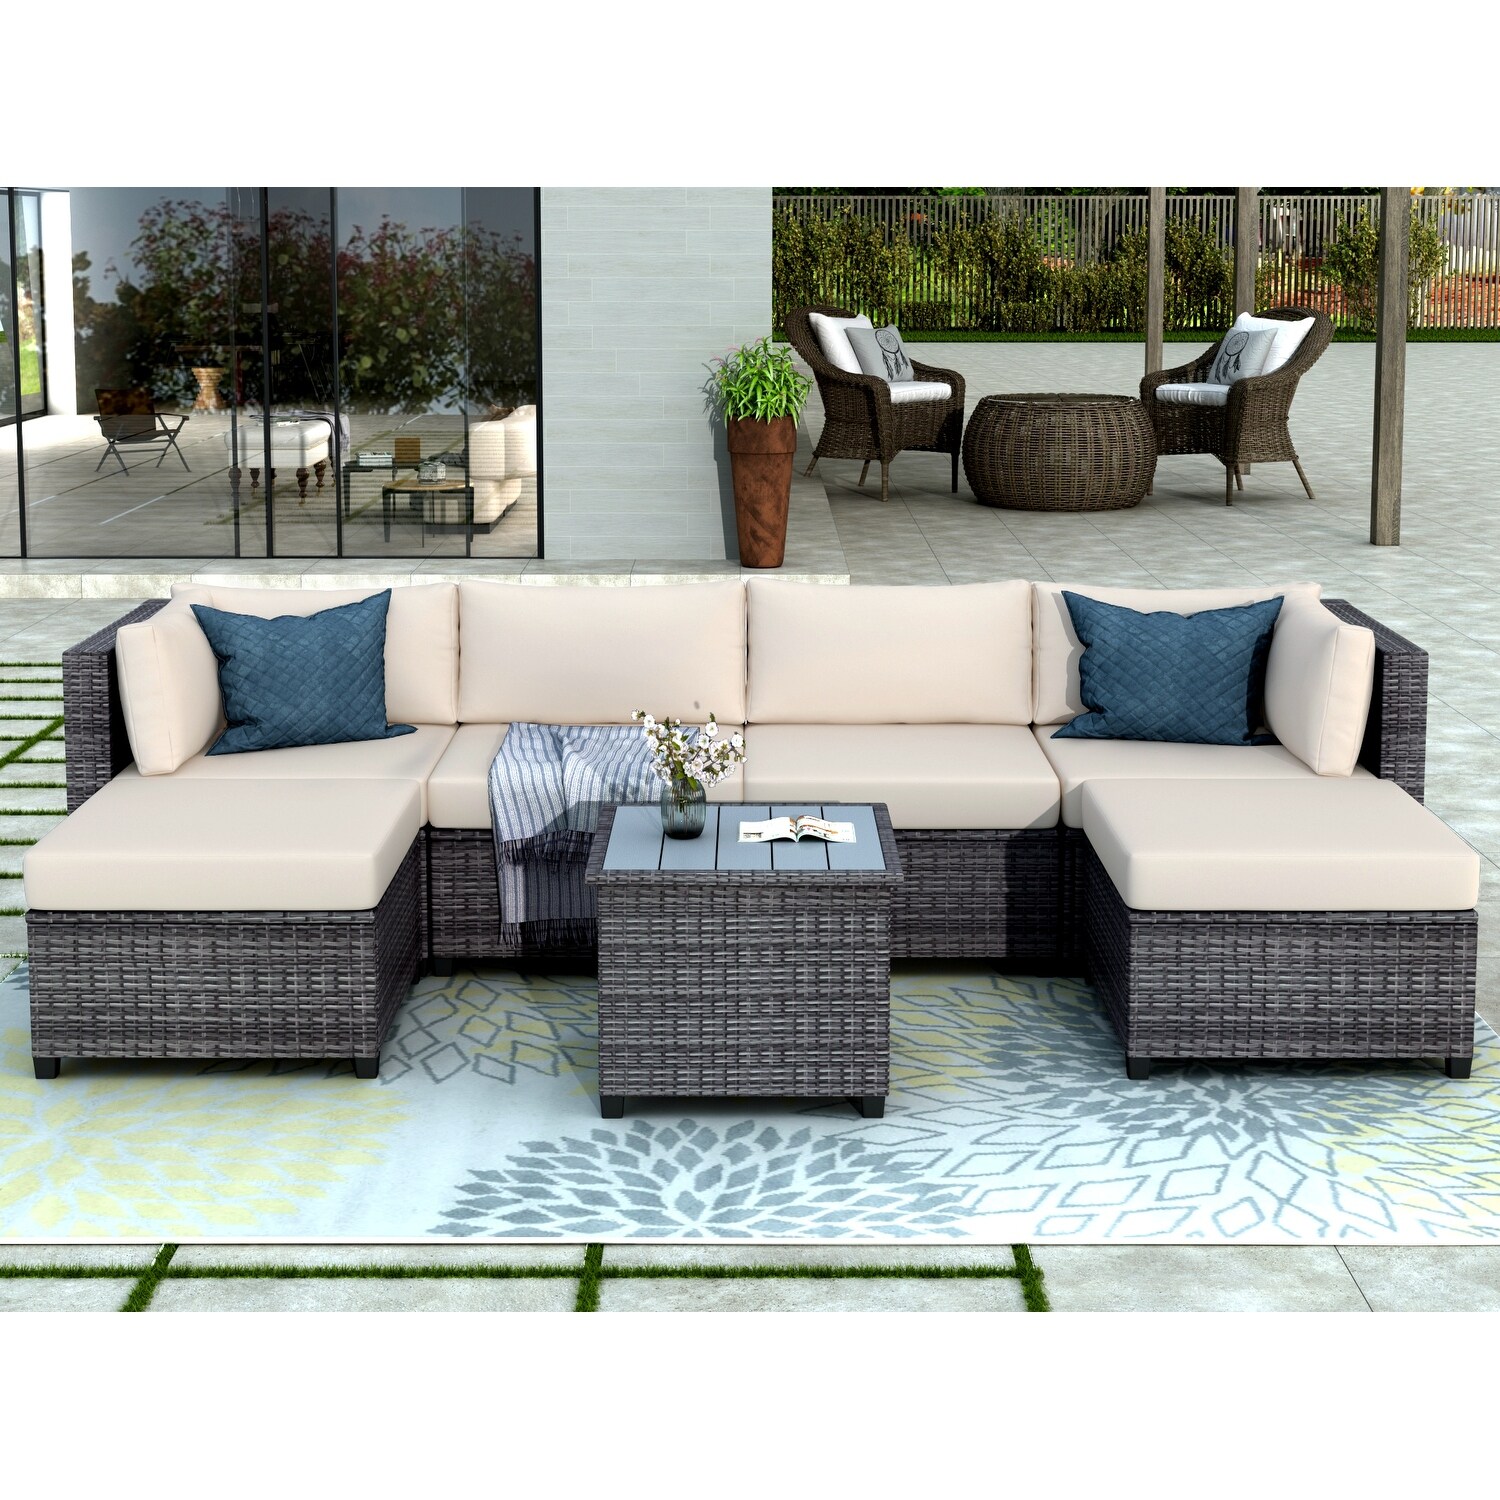 7 Piece Rattan Sectional Seating